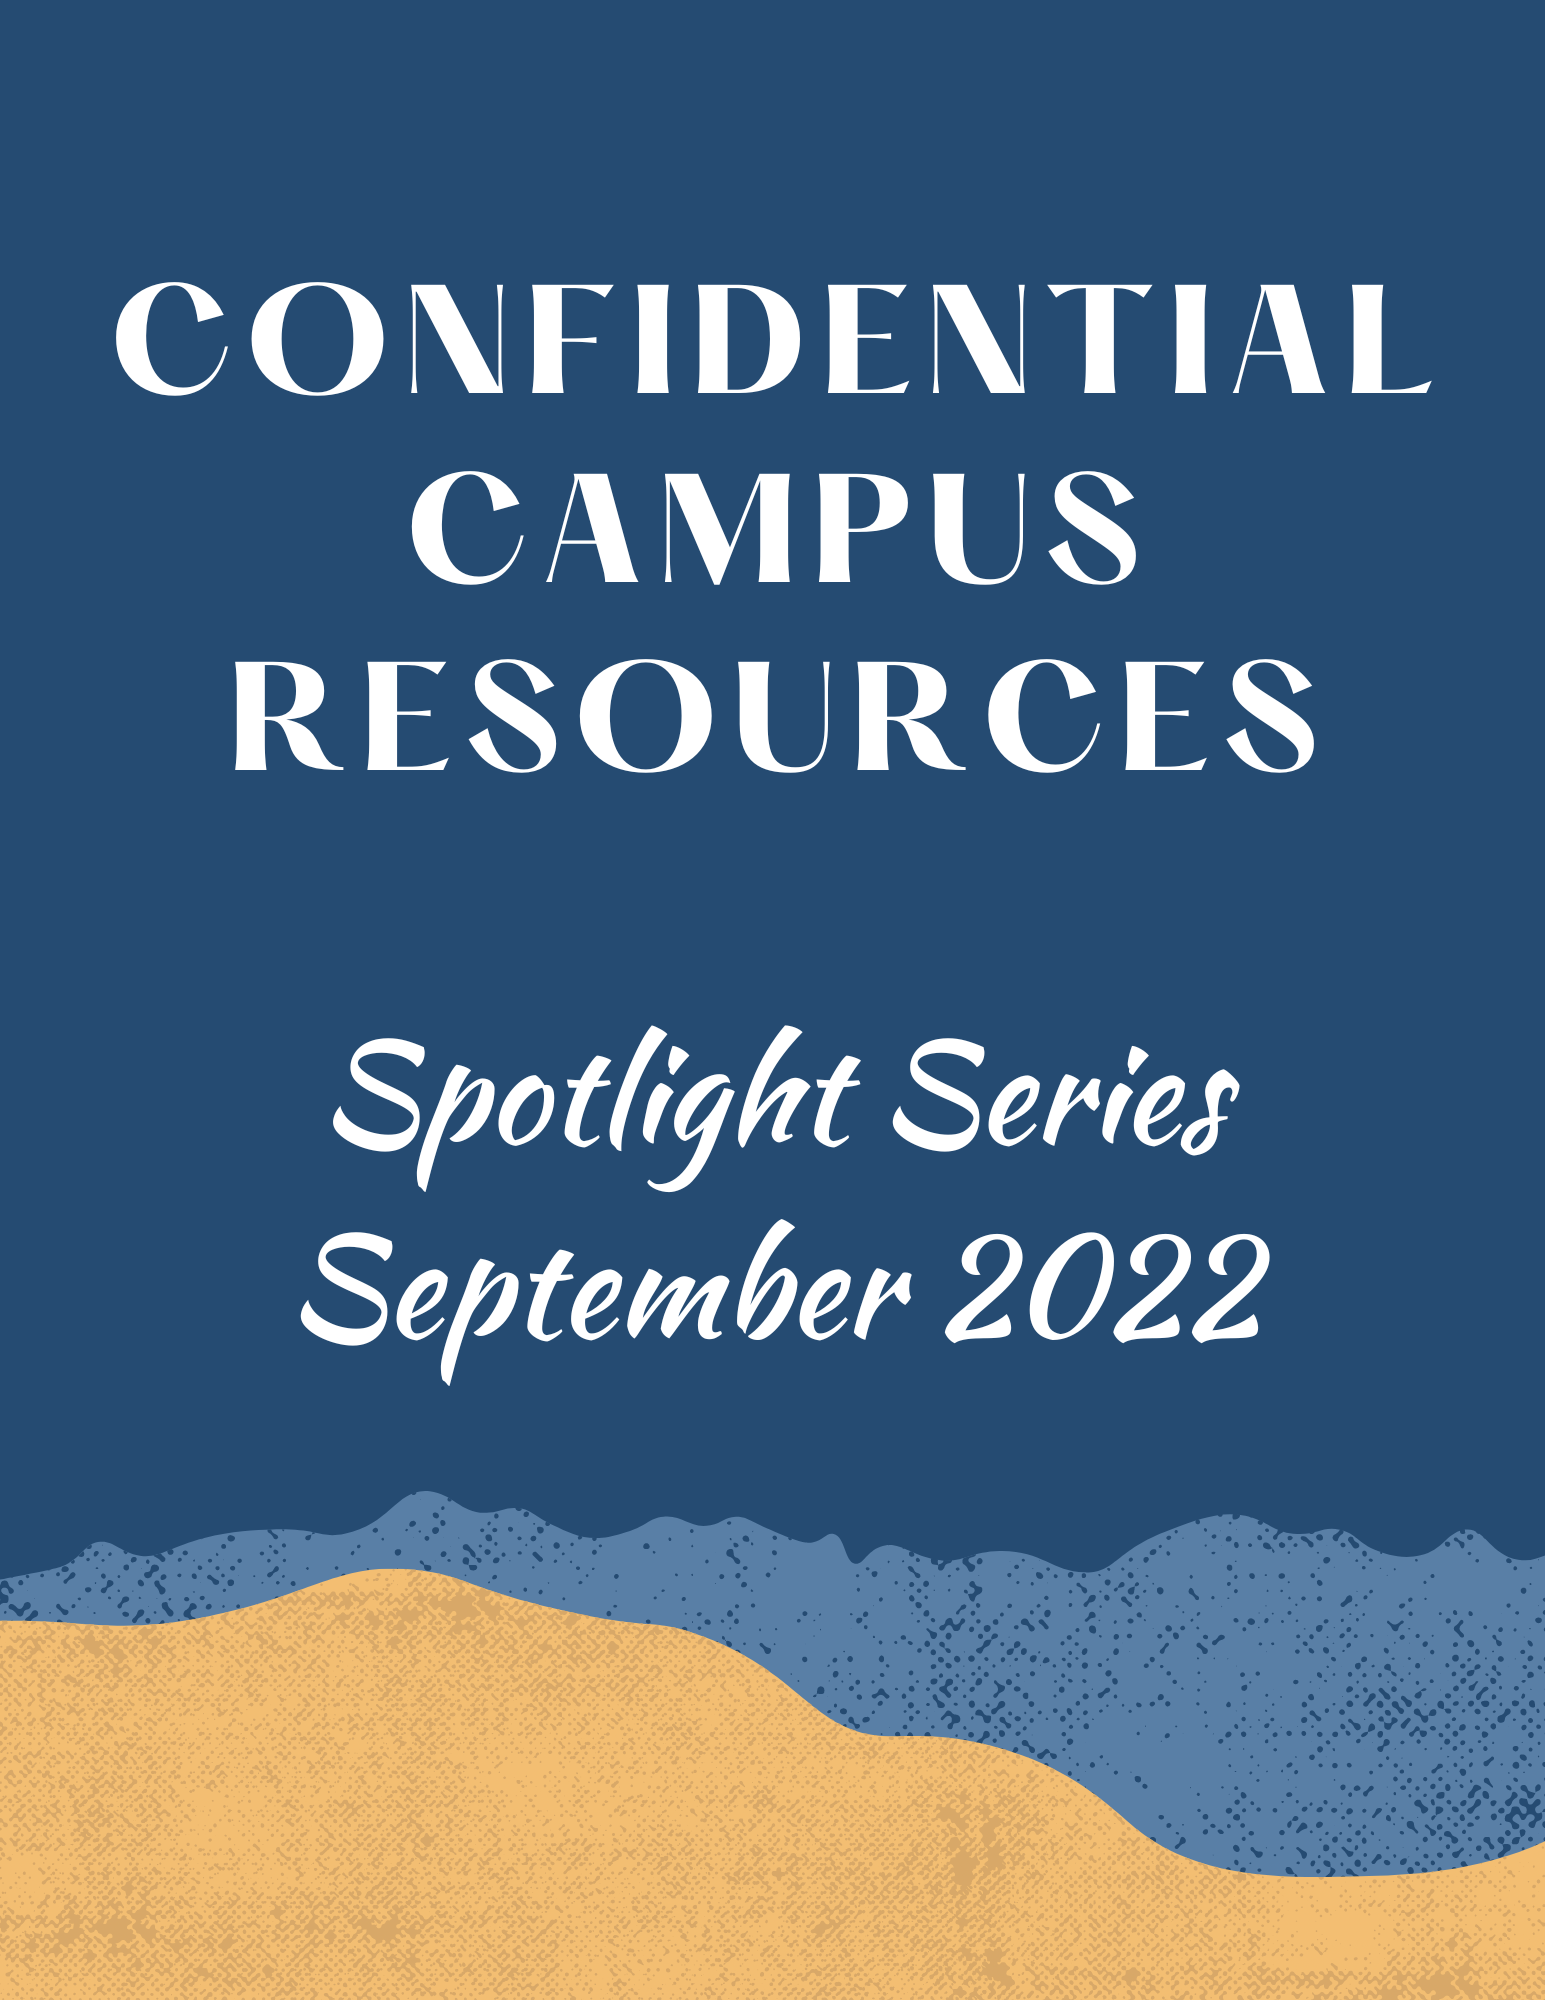 Confidential Campus resources sept 2022 spotlight series on dark blue background with blue and gold waves